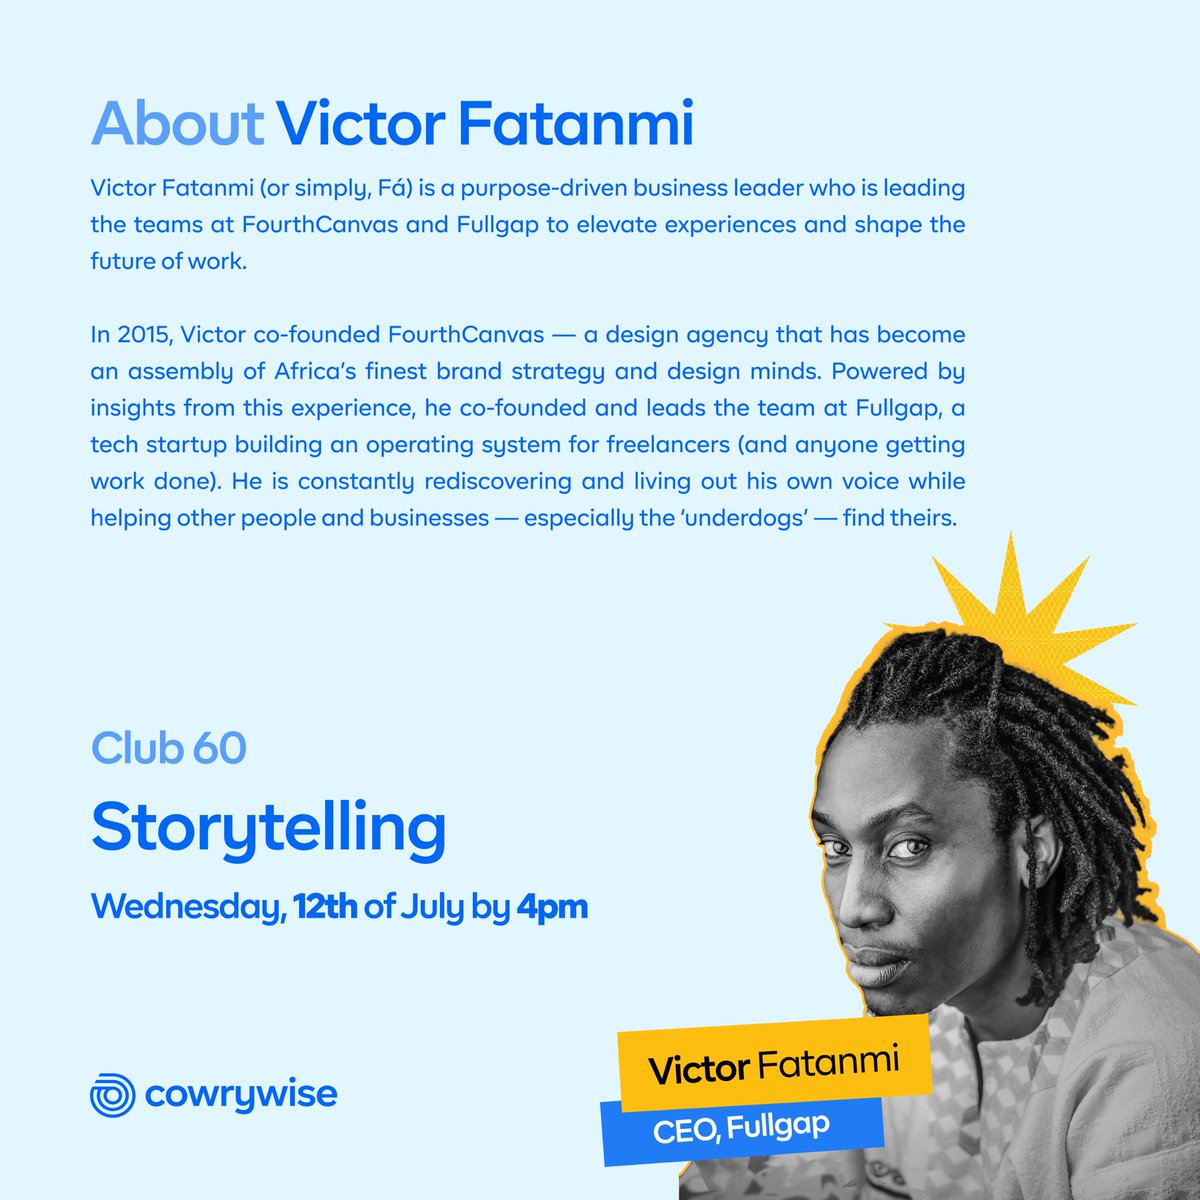 Looking forward to an amazing session on storytelling, I can't wait 🤭❤️ @cowrywise #CampusAmbassador #CLUB60event with @victorfatanmi